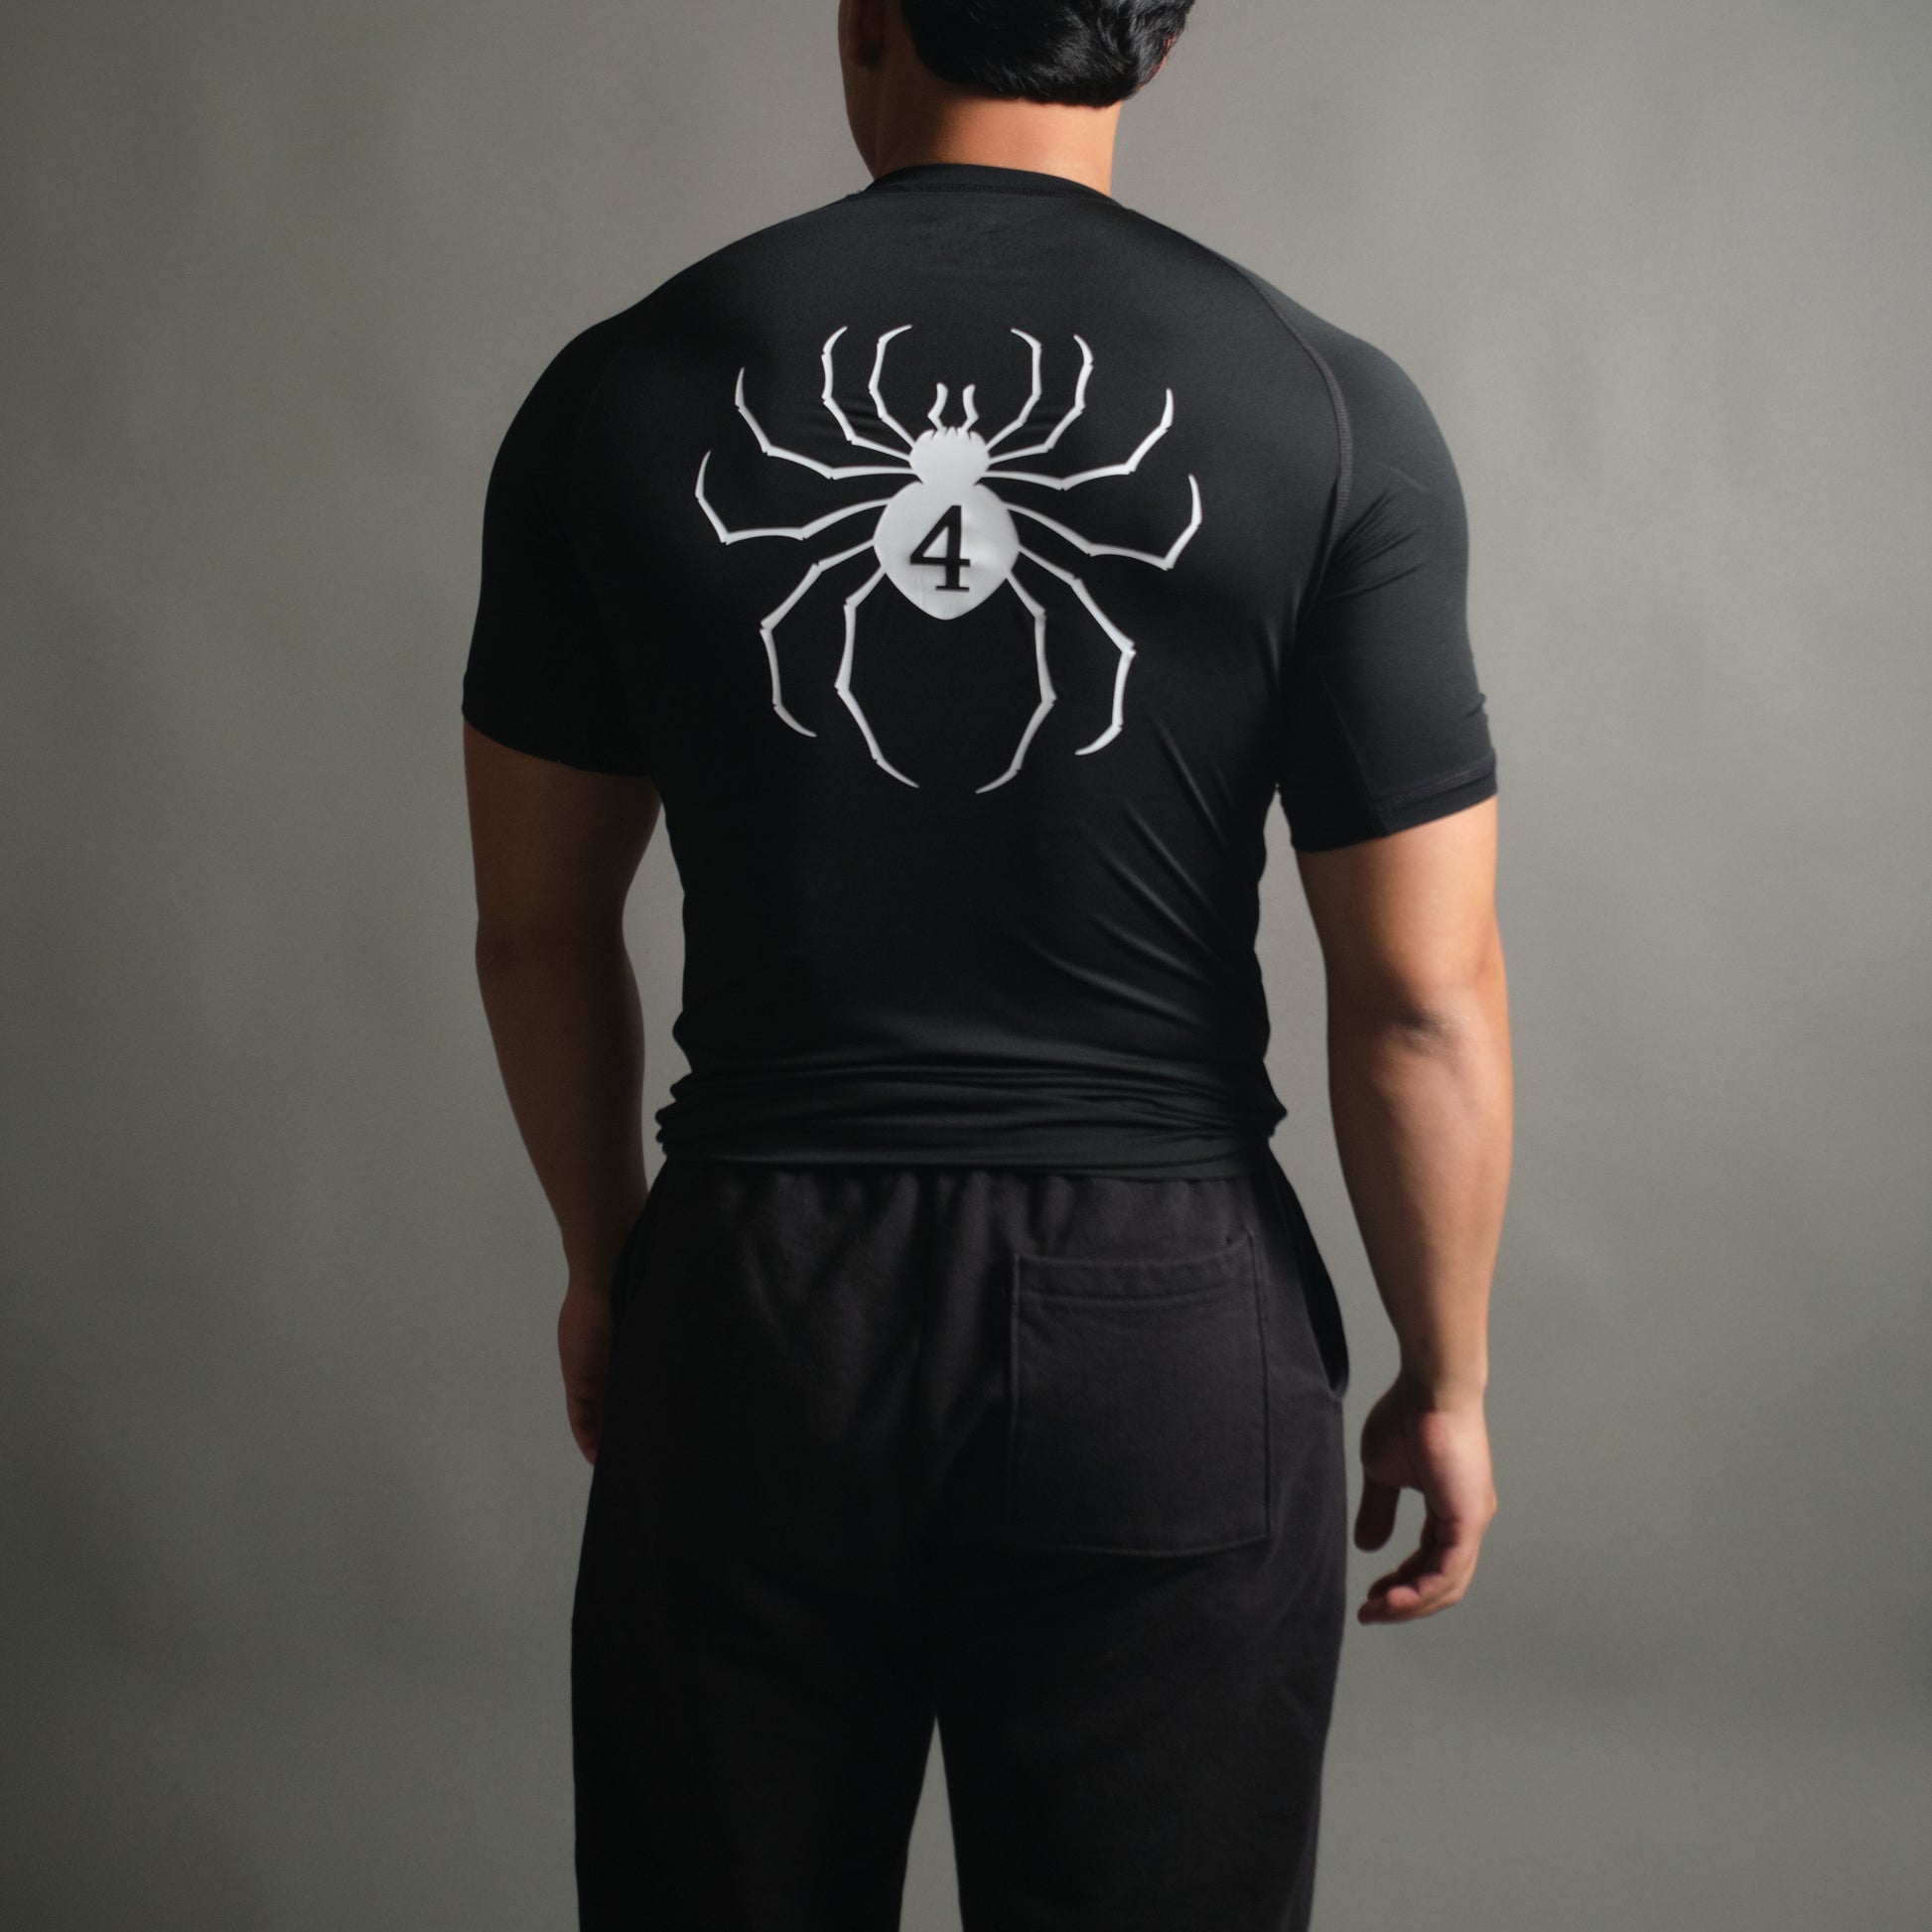  Anlixin Superhero Model T-Shirt Compression Shirt (Small, Short  Black) : Clothing, Shoes & Jewelry